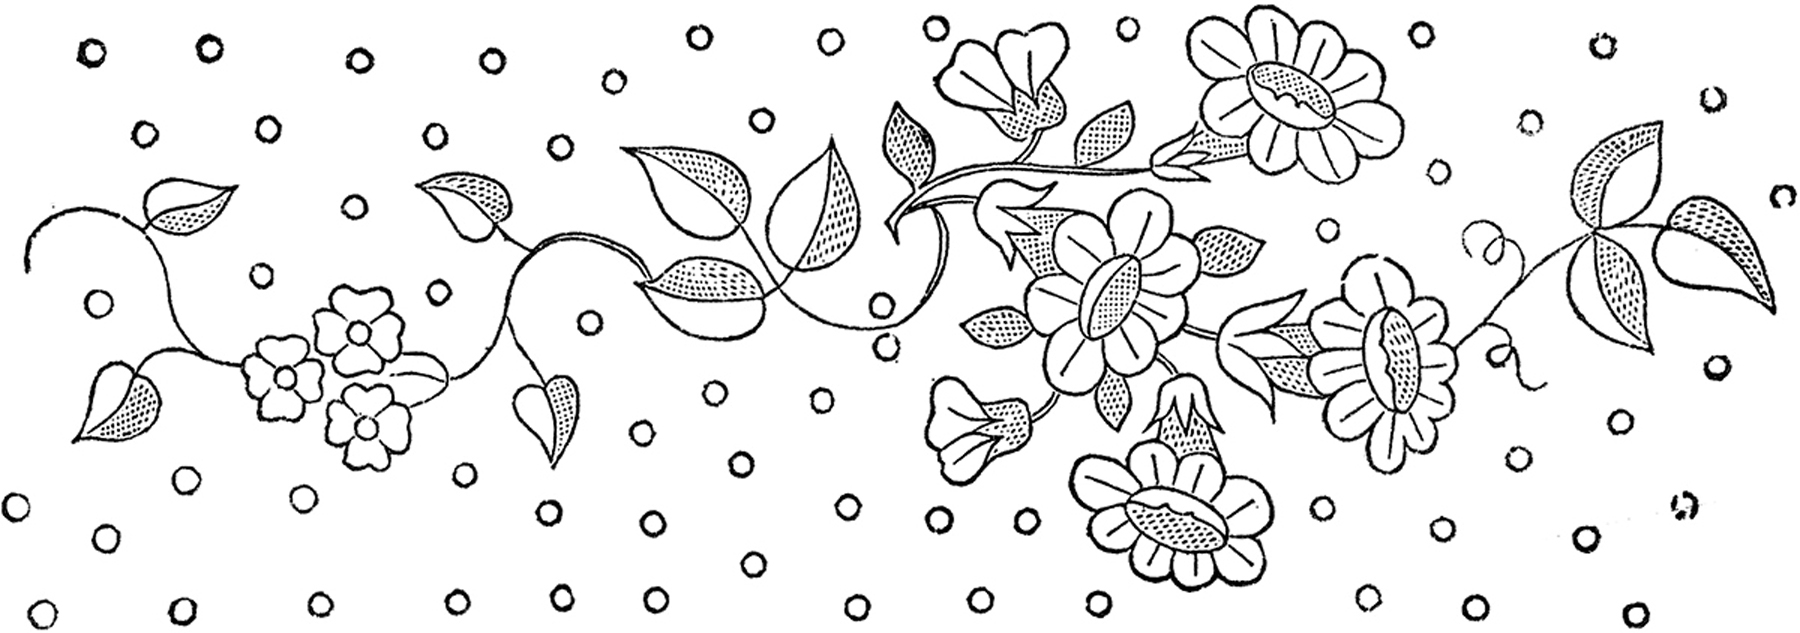 Free Printable Embroidery Patterns By Hand Floral Embroidery Patterns Pretty The Graphics Fairy